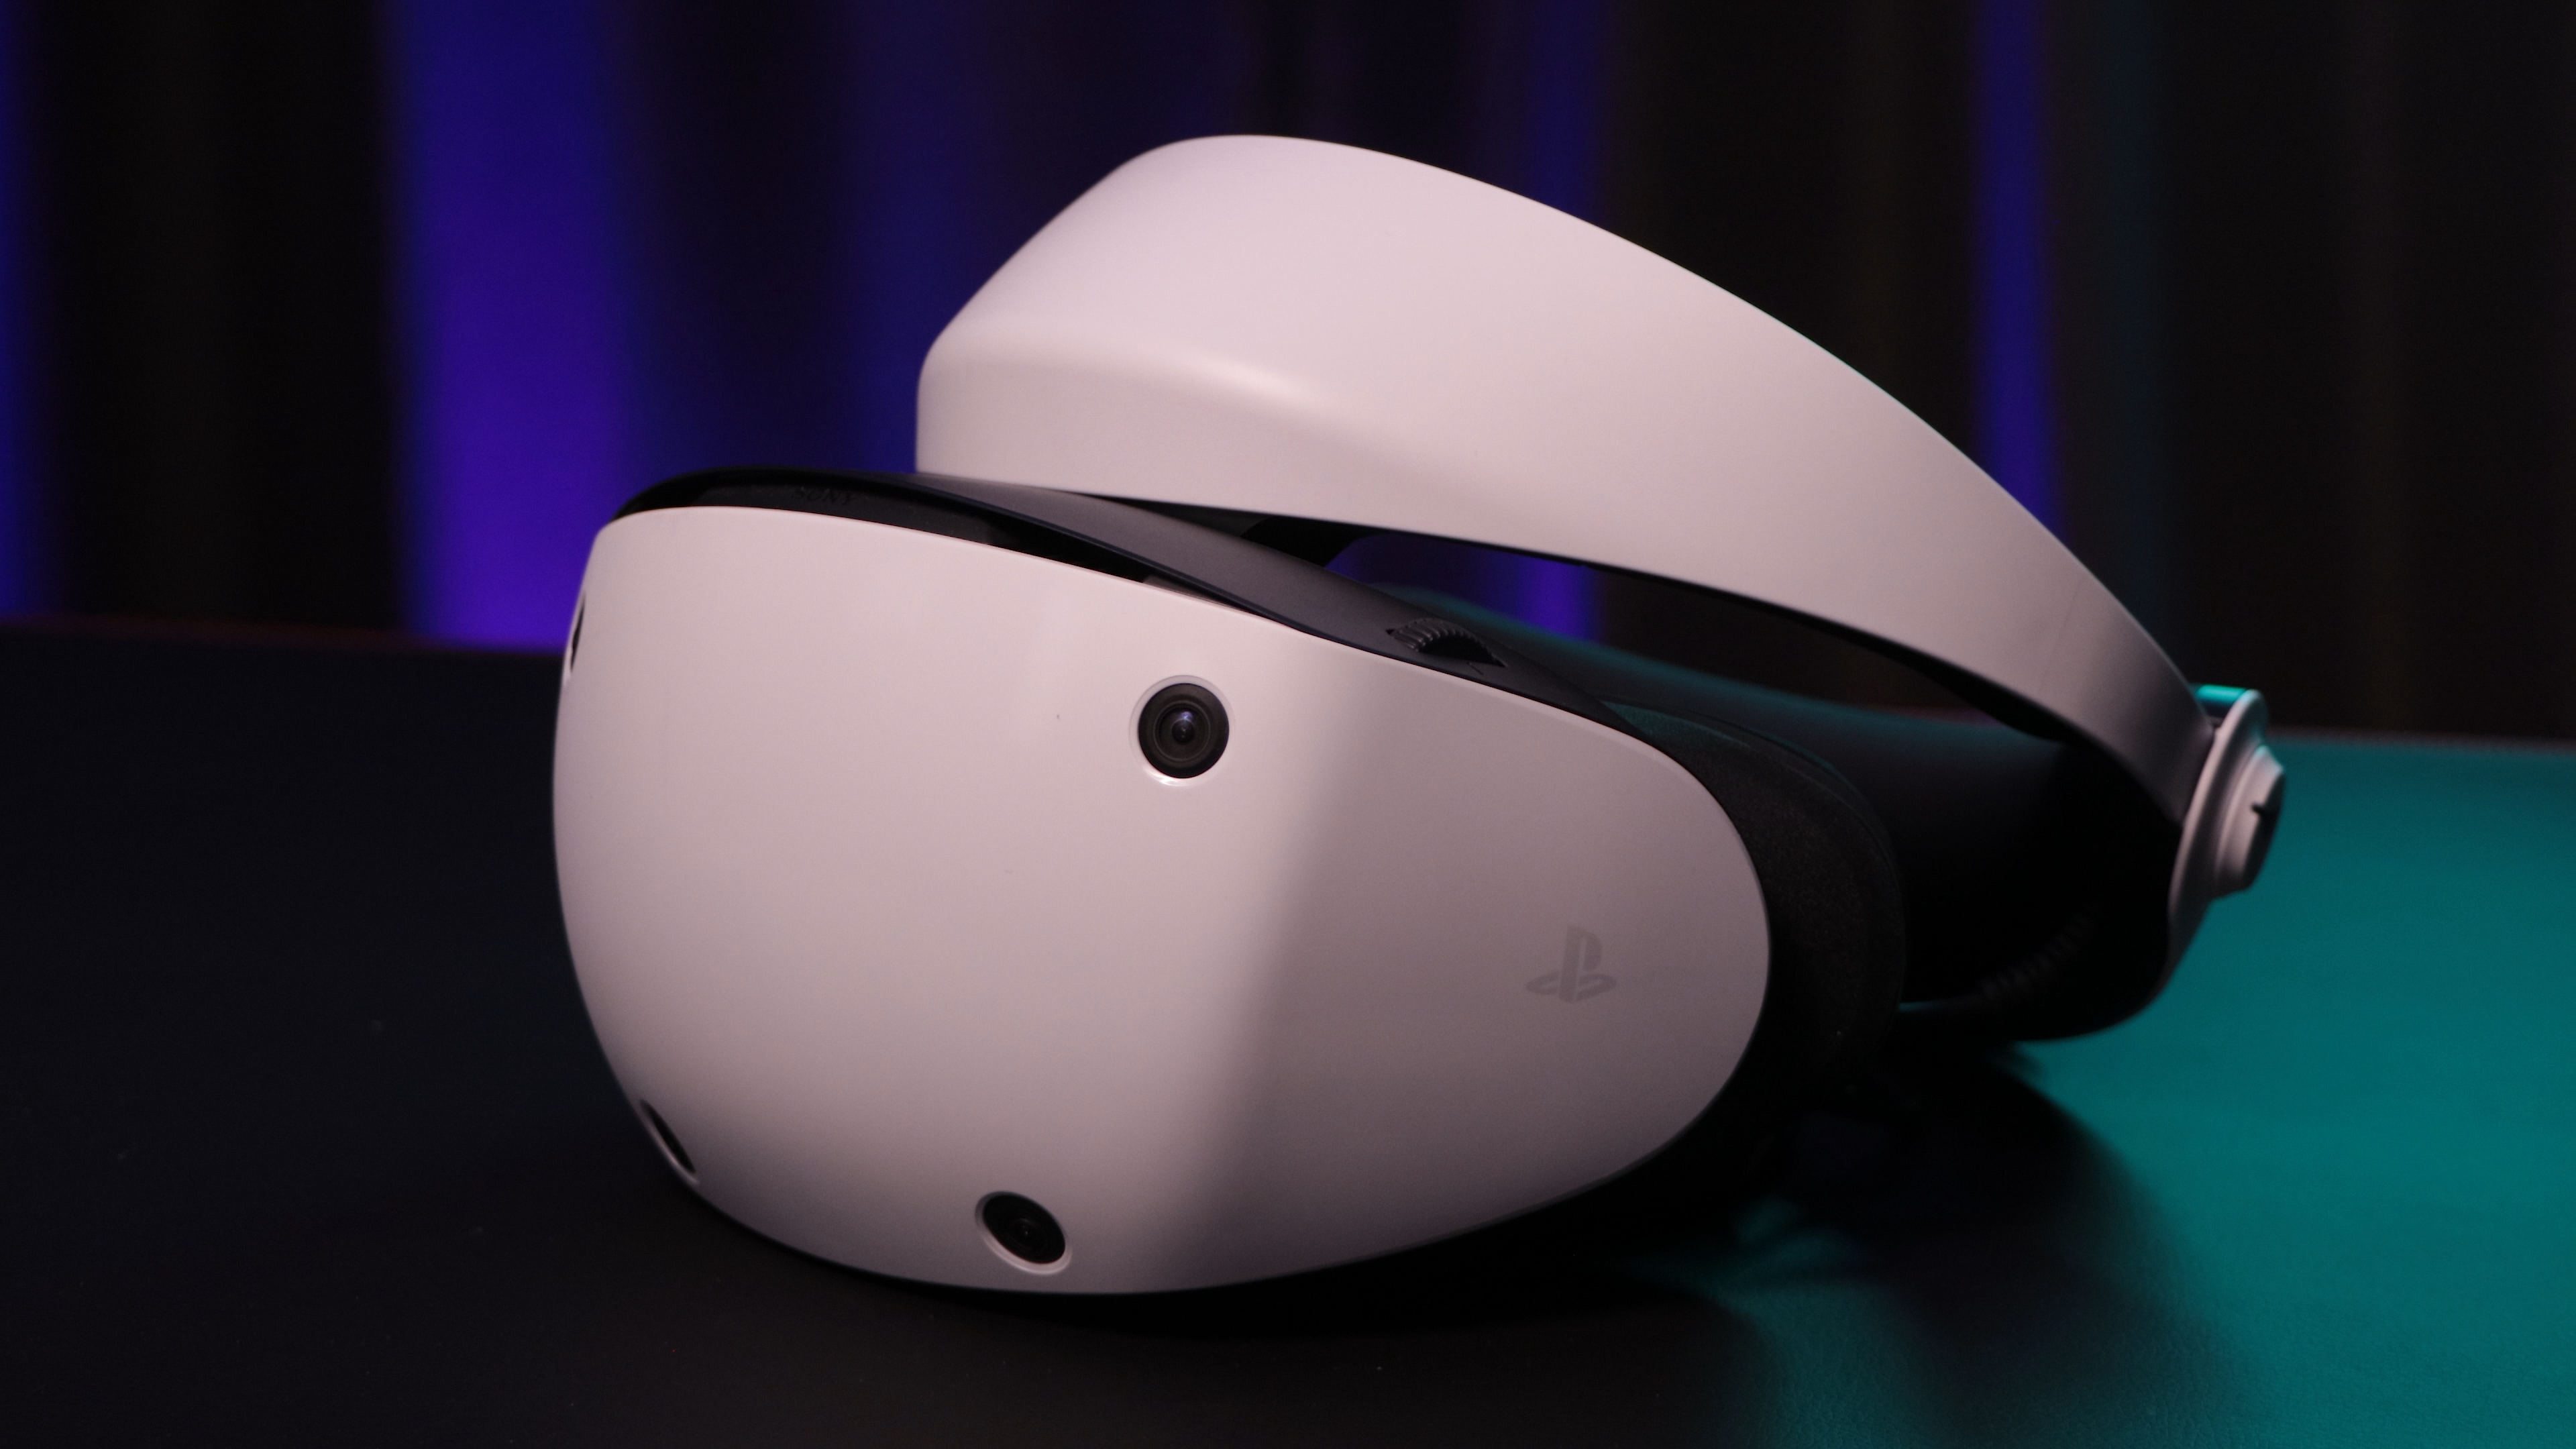 PSVR 2 Review Image showing the headset, and lens adjustment scrolling wheel on the top left of the headset